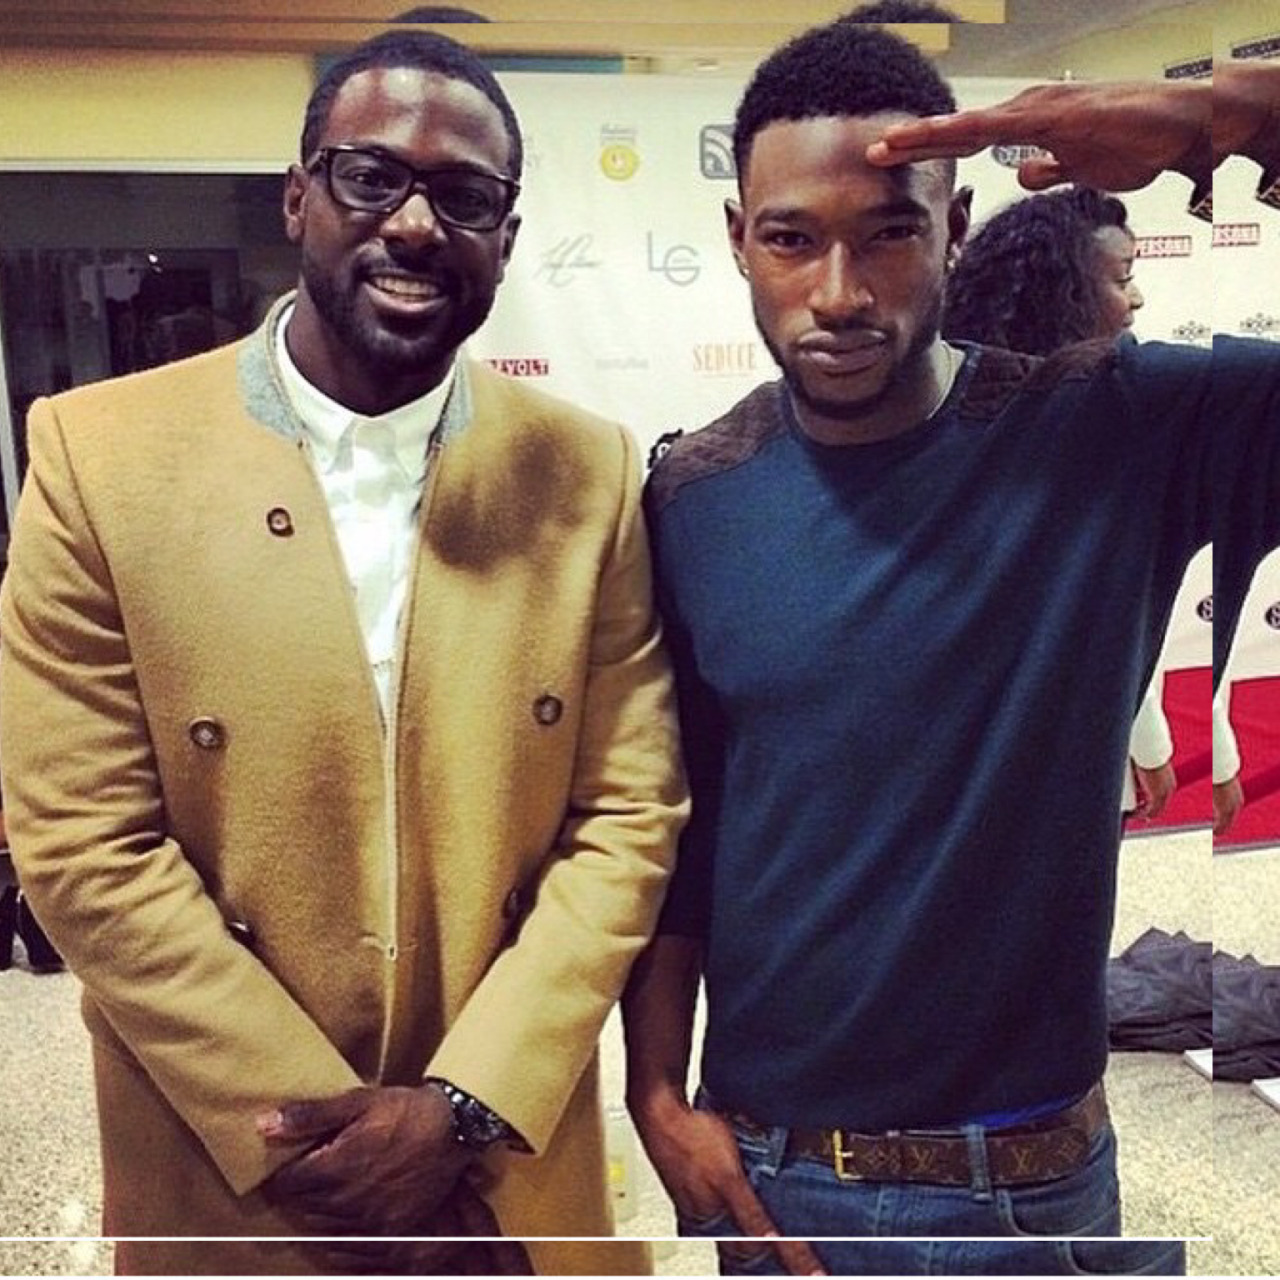 👑😍🍫💛 #lance gross #kevin McCall #yasss #handsome...